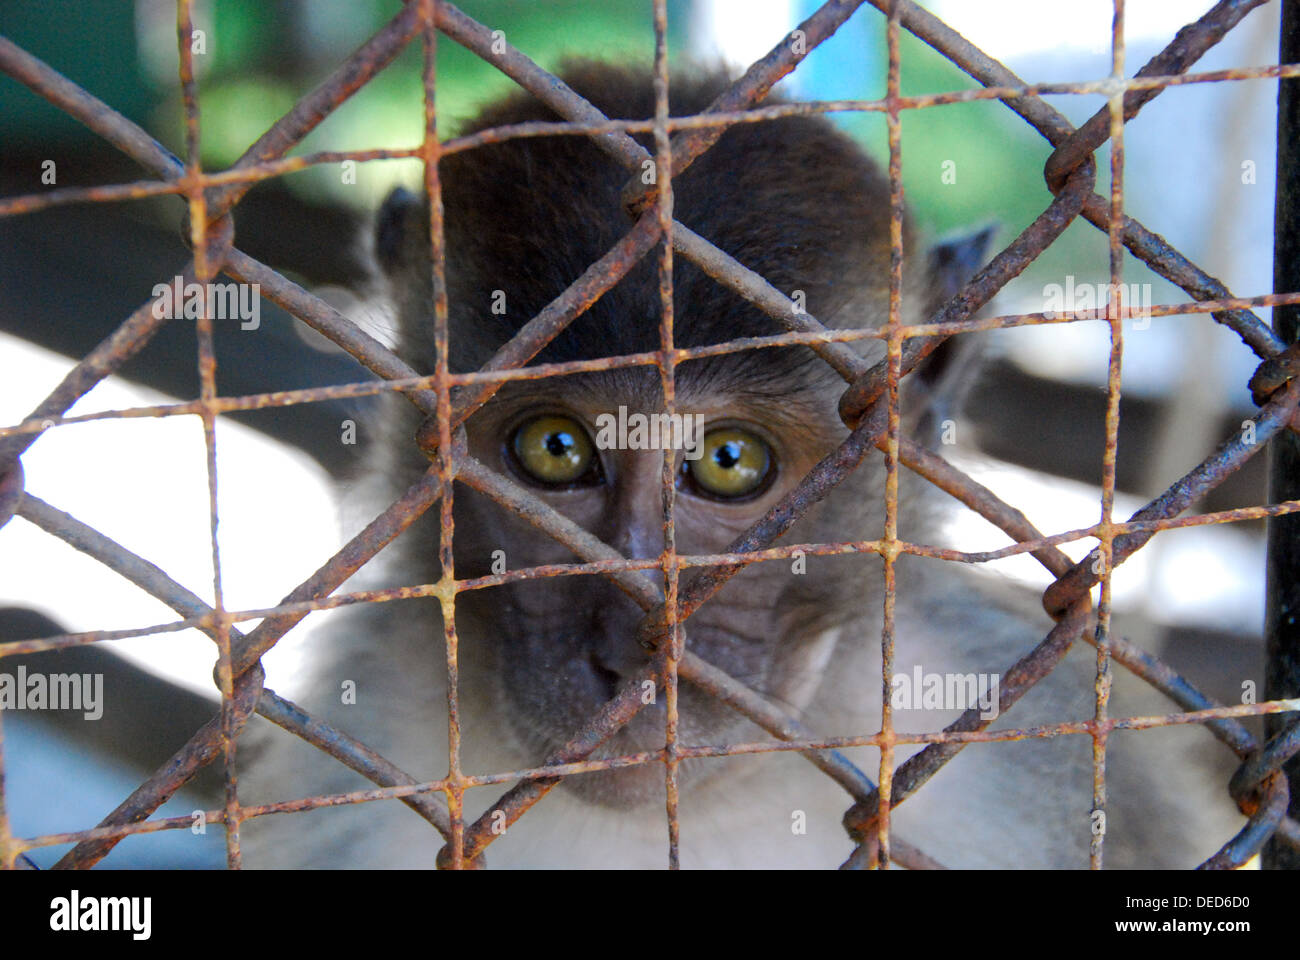 Caged macaque monkey in Thailand Stock Photo